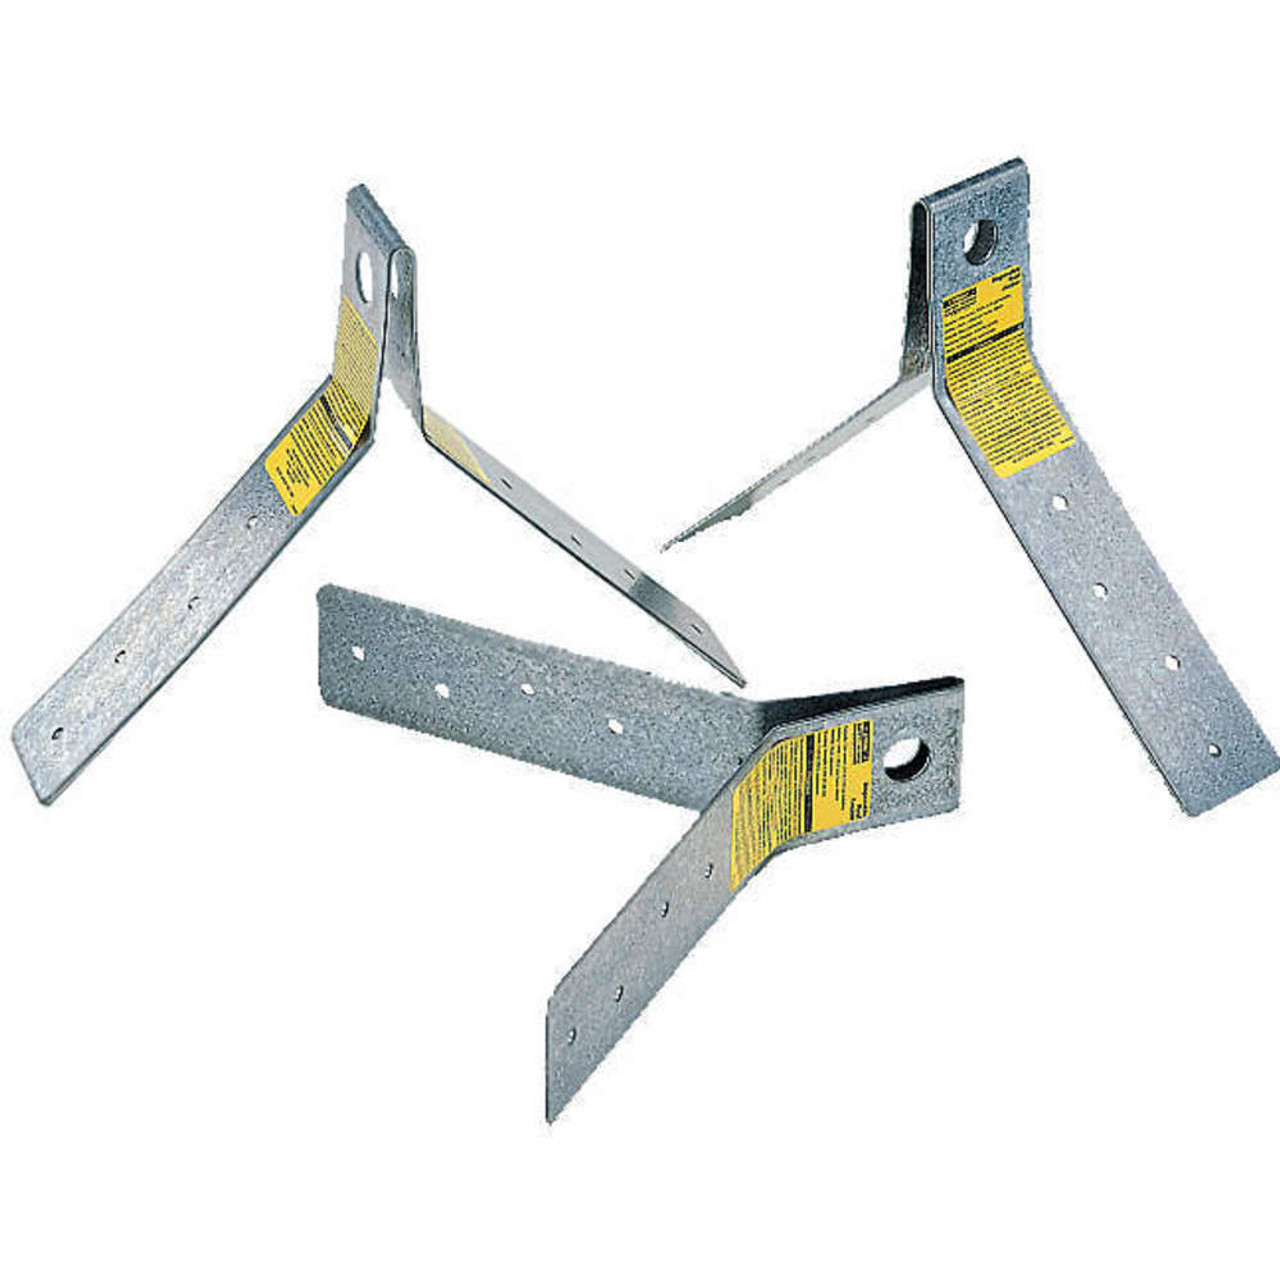 MSA 416068 FP Pro Disposable Temporary Roof Anchor - 3/Pack